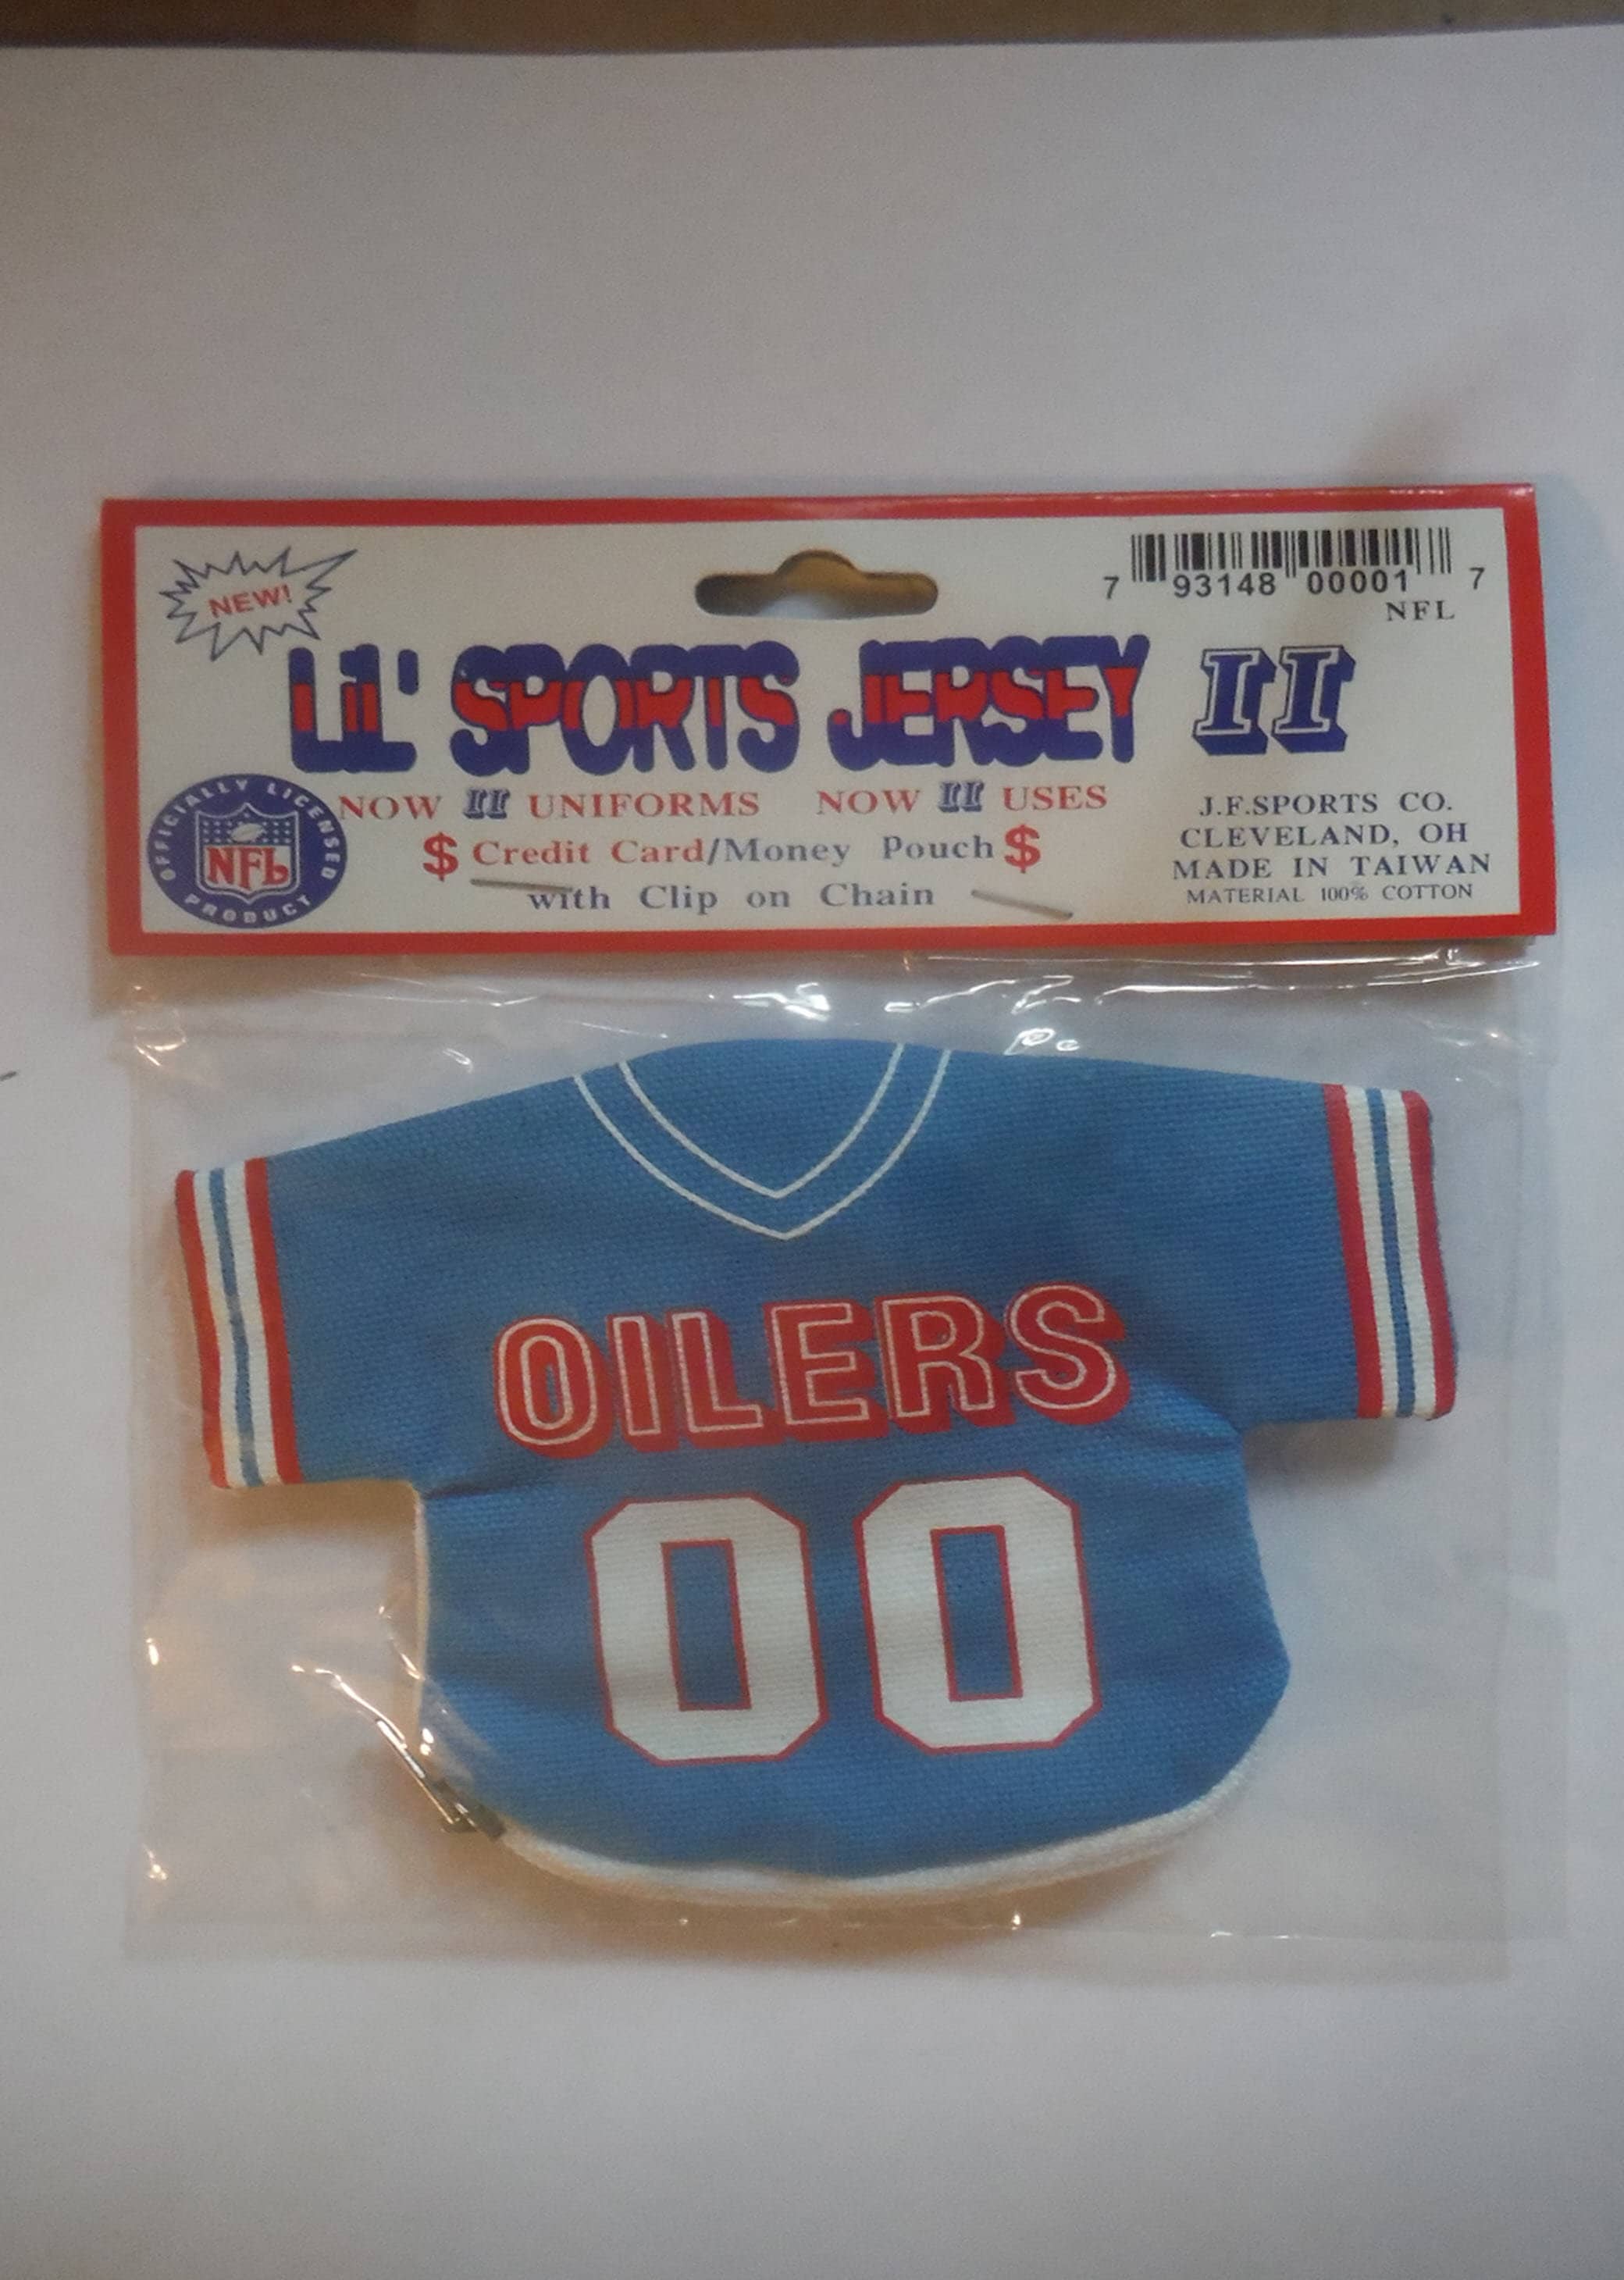 Houston Oilers: Warren Moon 1990 Throwback Jersey - Stitched (M